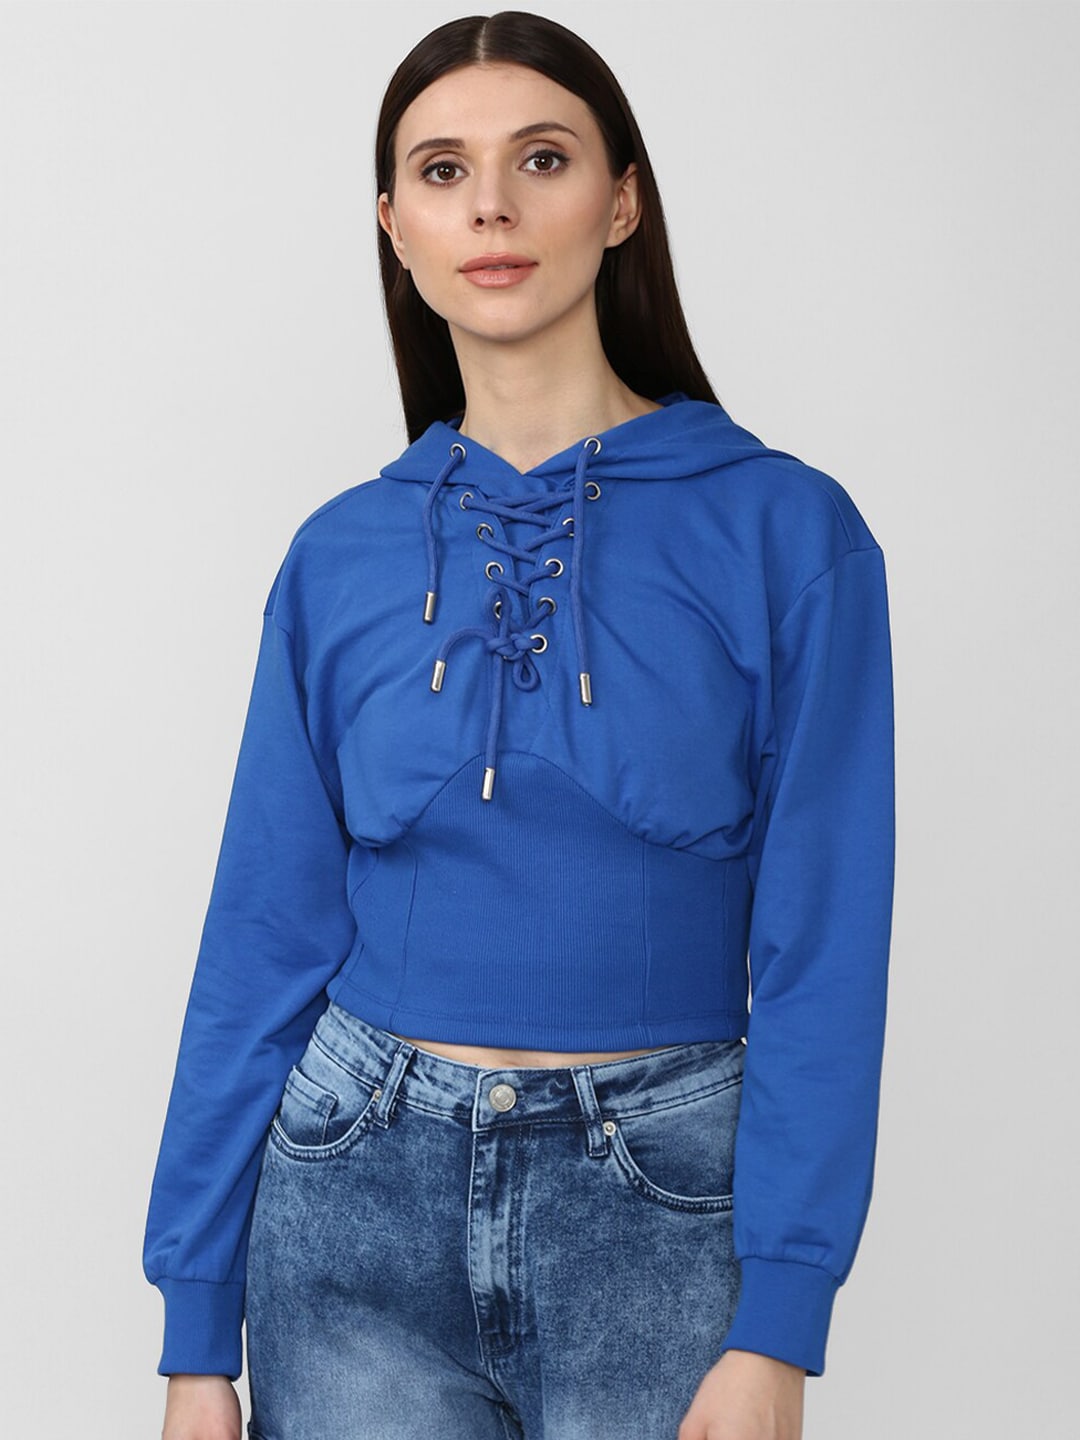 FOREVER 21 Women Blue Hooded Sweatshirt Price in India